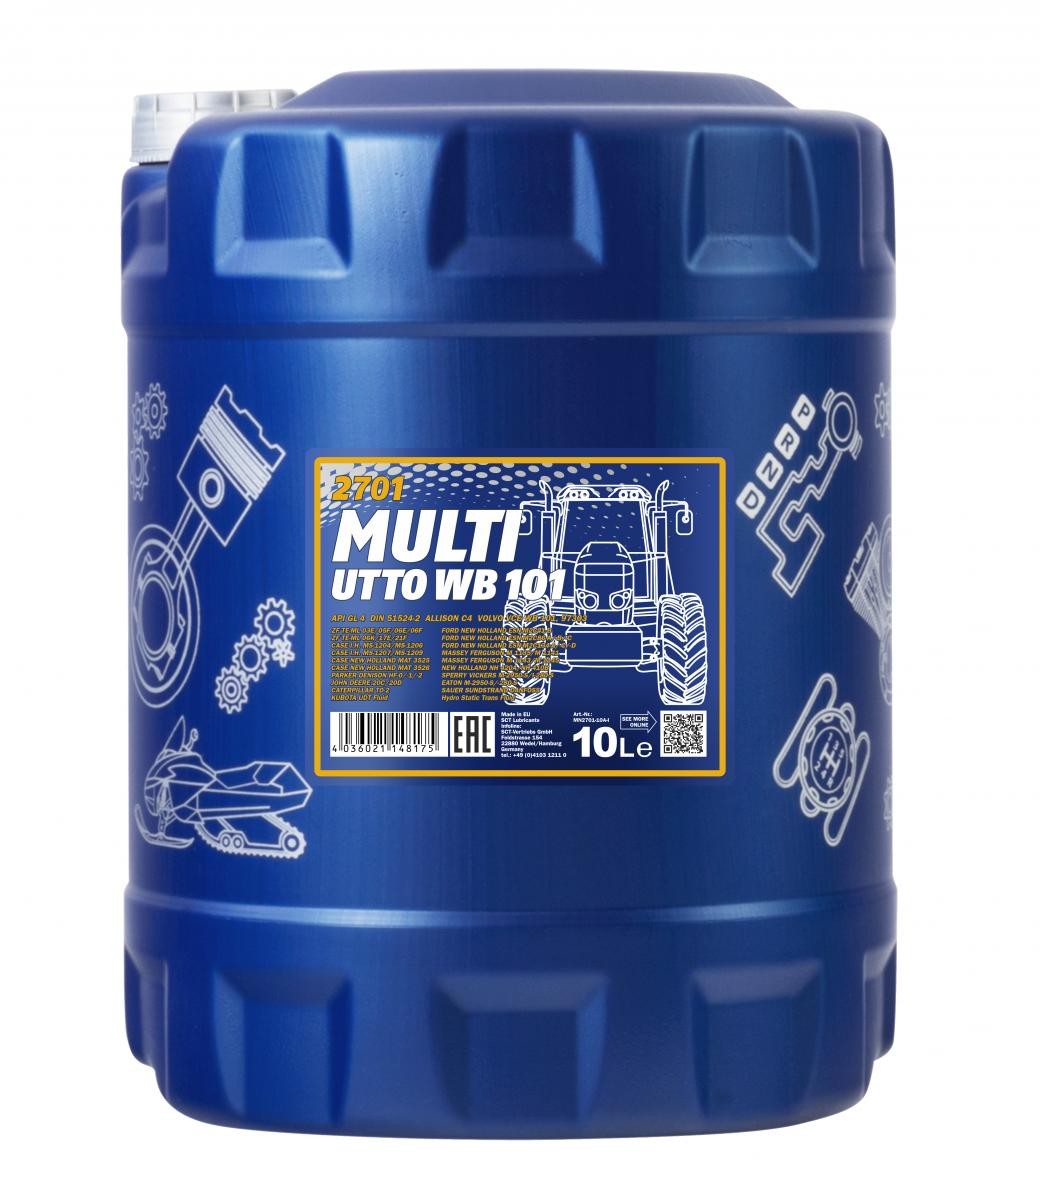 MANNOL Multi UTTO WB 101 MN2701-10 Transmission fluid Mineral Oil, Capacity: 10l